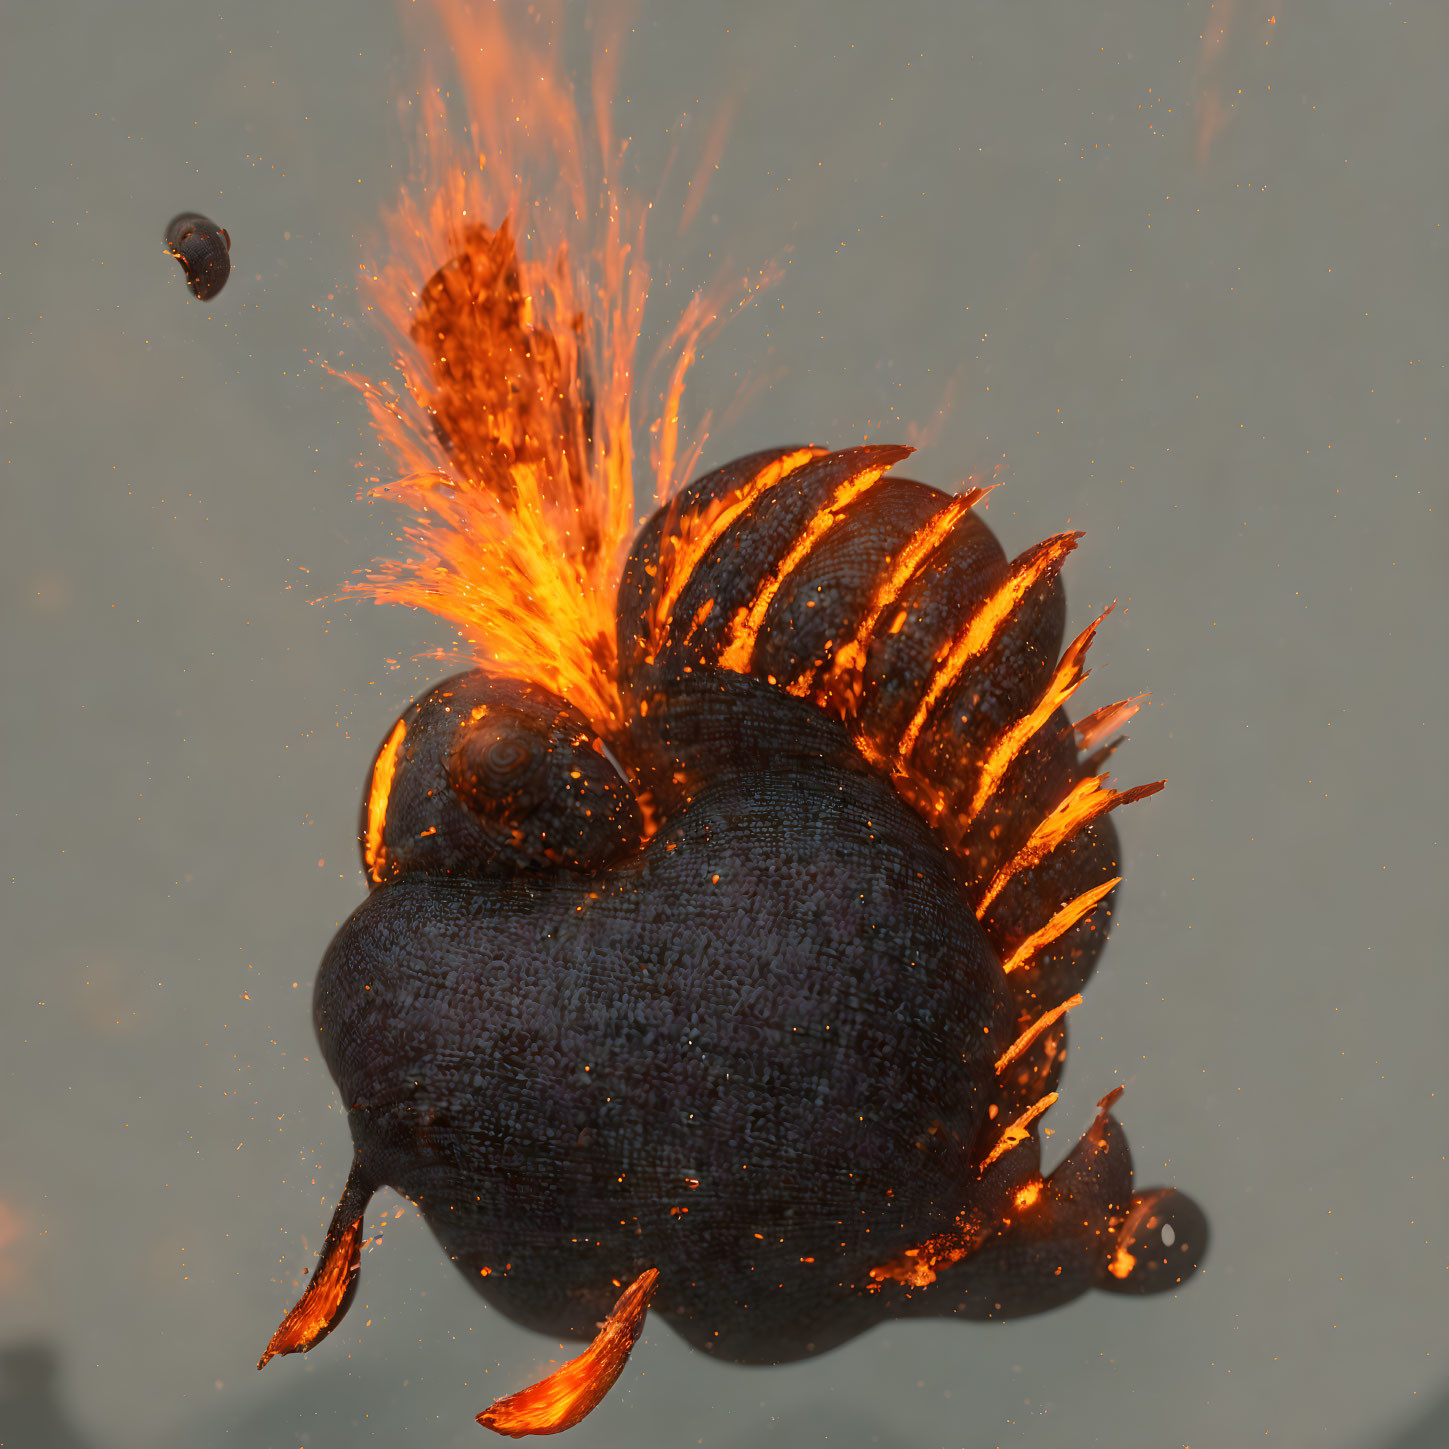 Supposed to be volcano snail